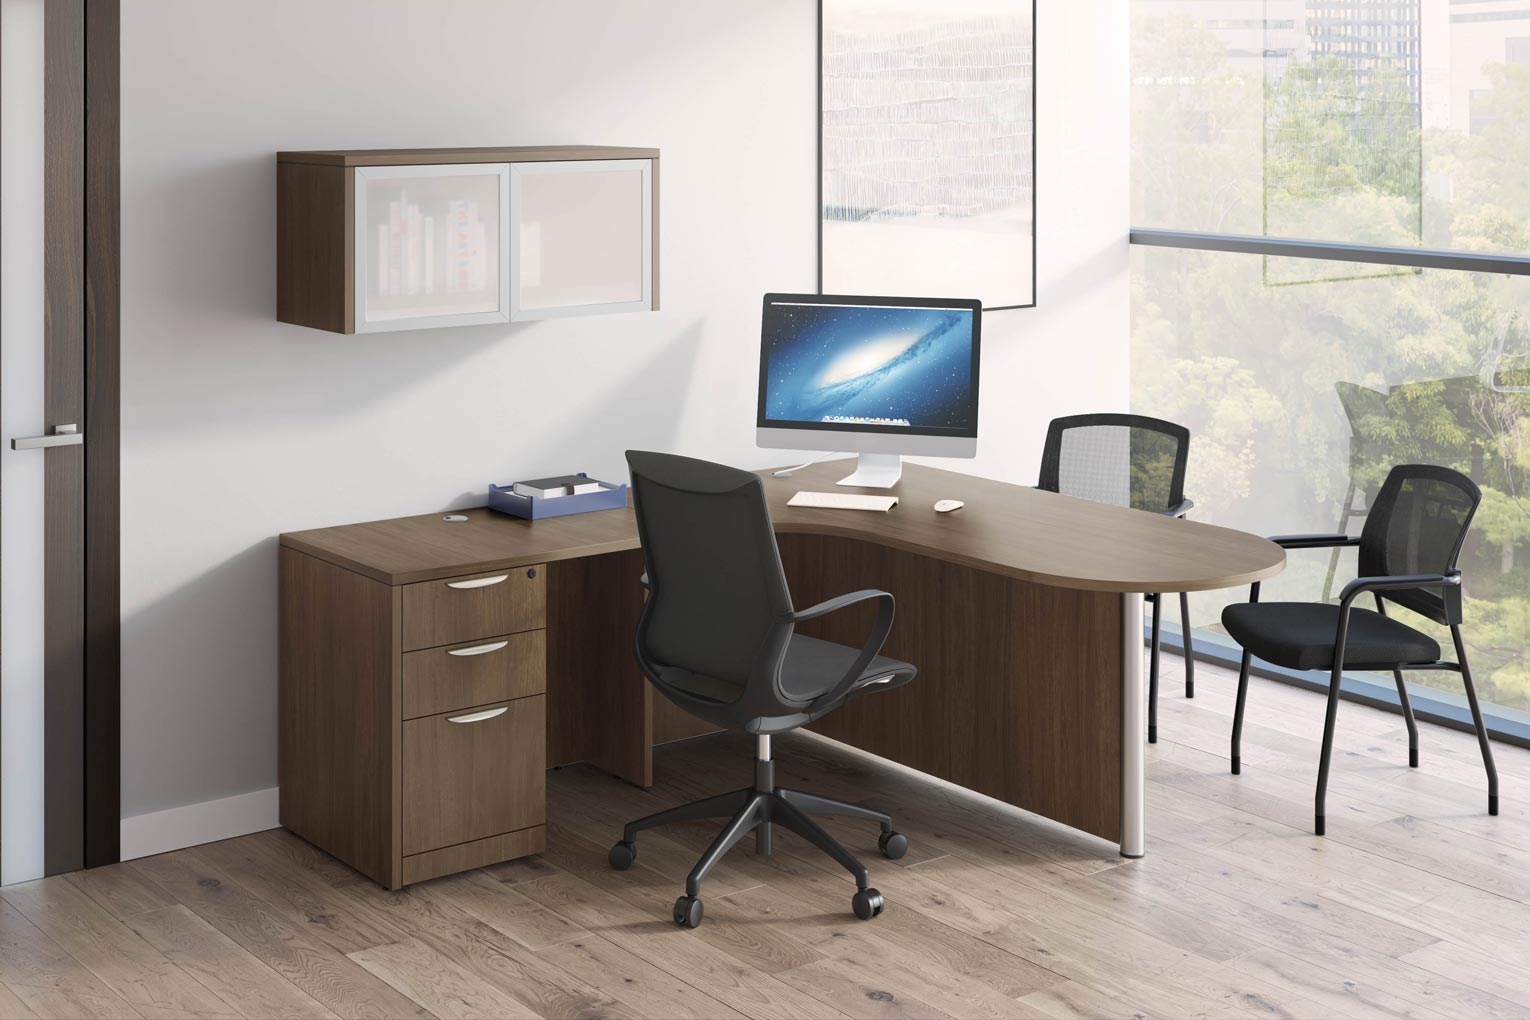 Brown desk with black chairs at it